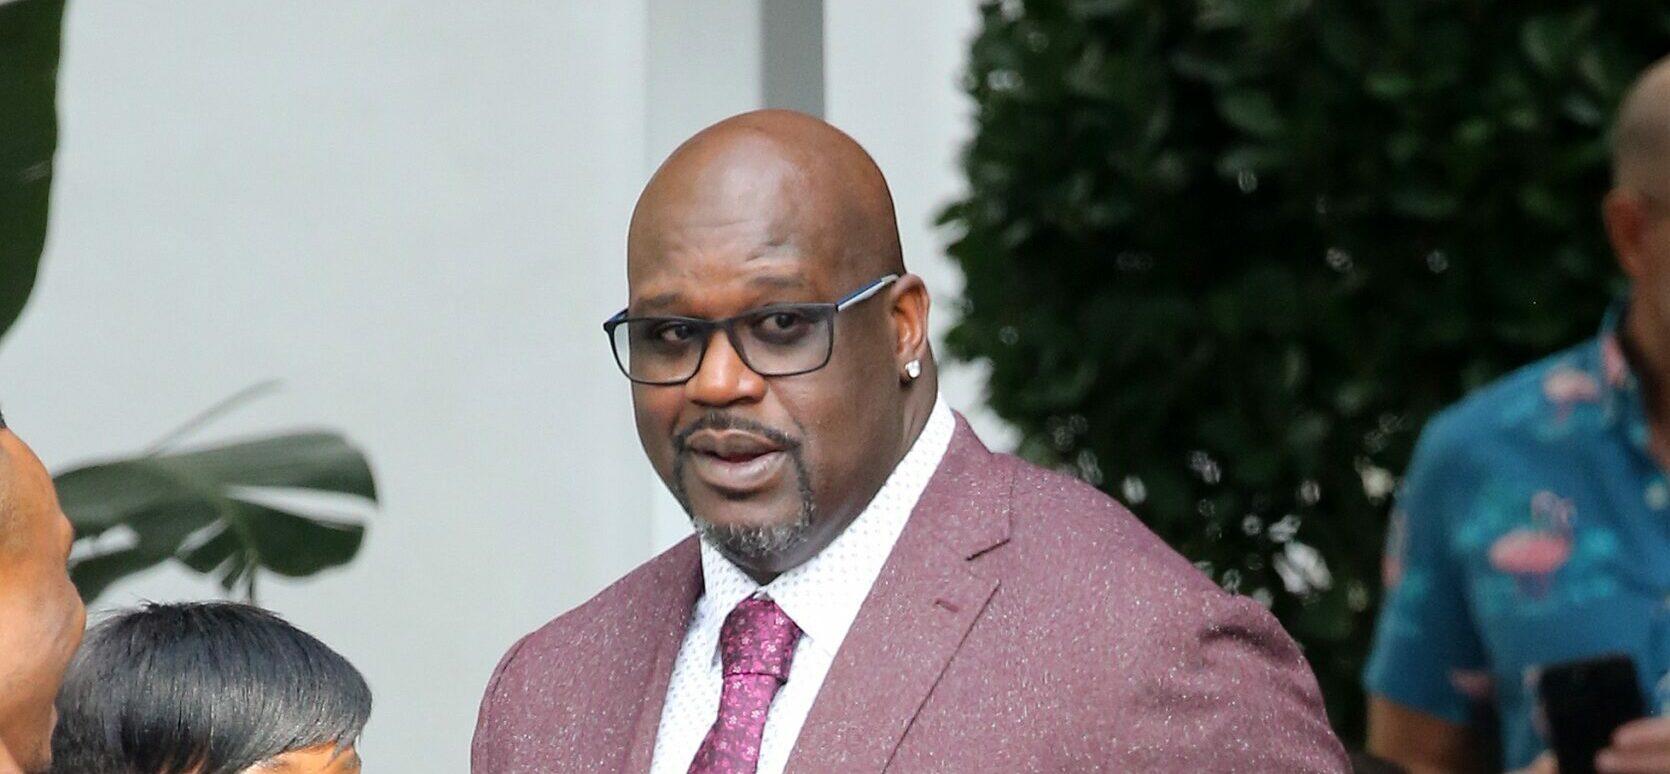 Shaquille O apos Neal who is still mourning the death of his close friend Kobe Bryant looks to be in good spirits as he greets Mark Cuban in Miami